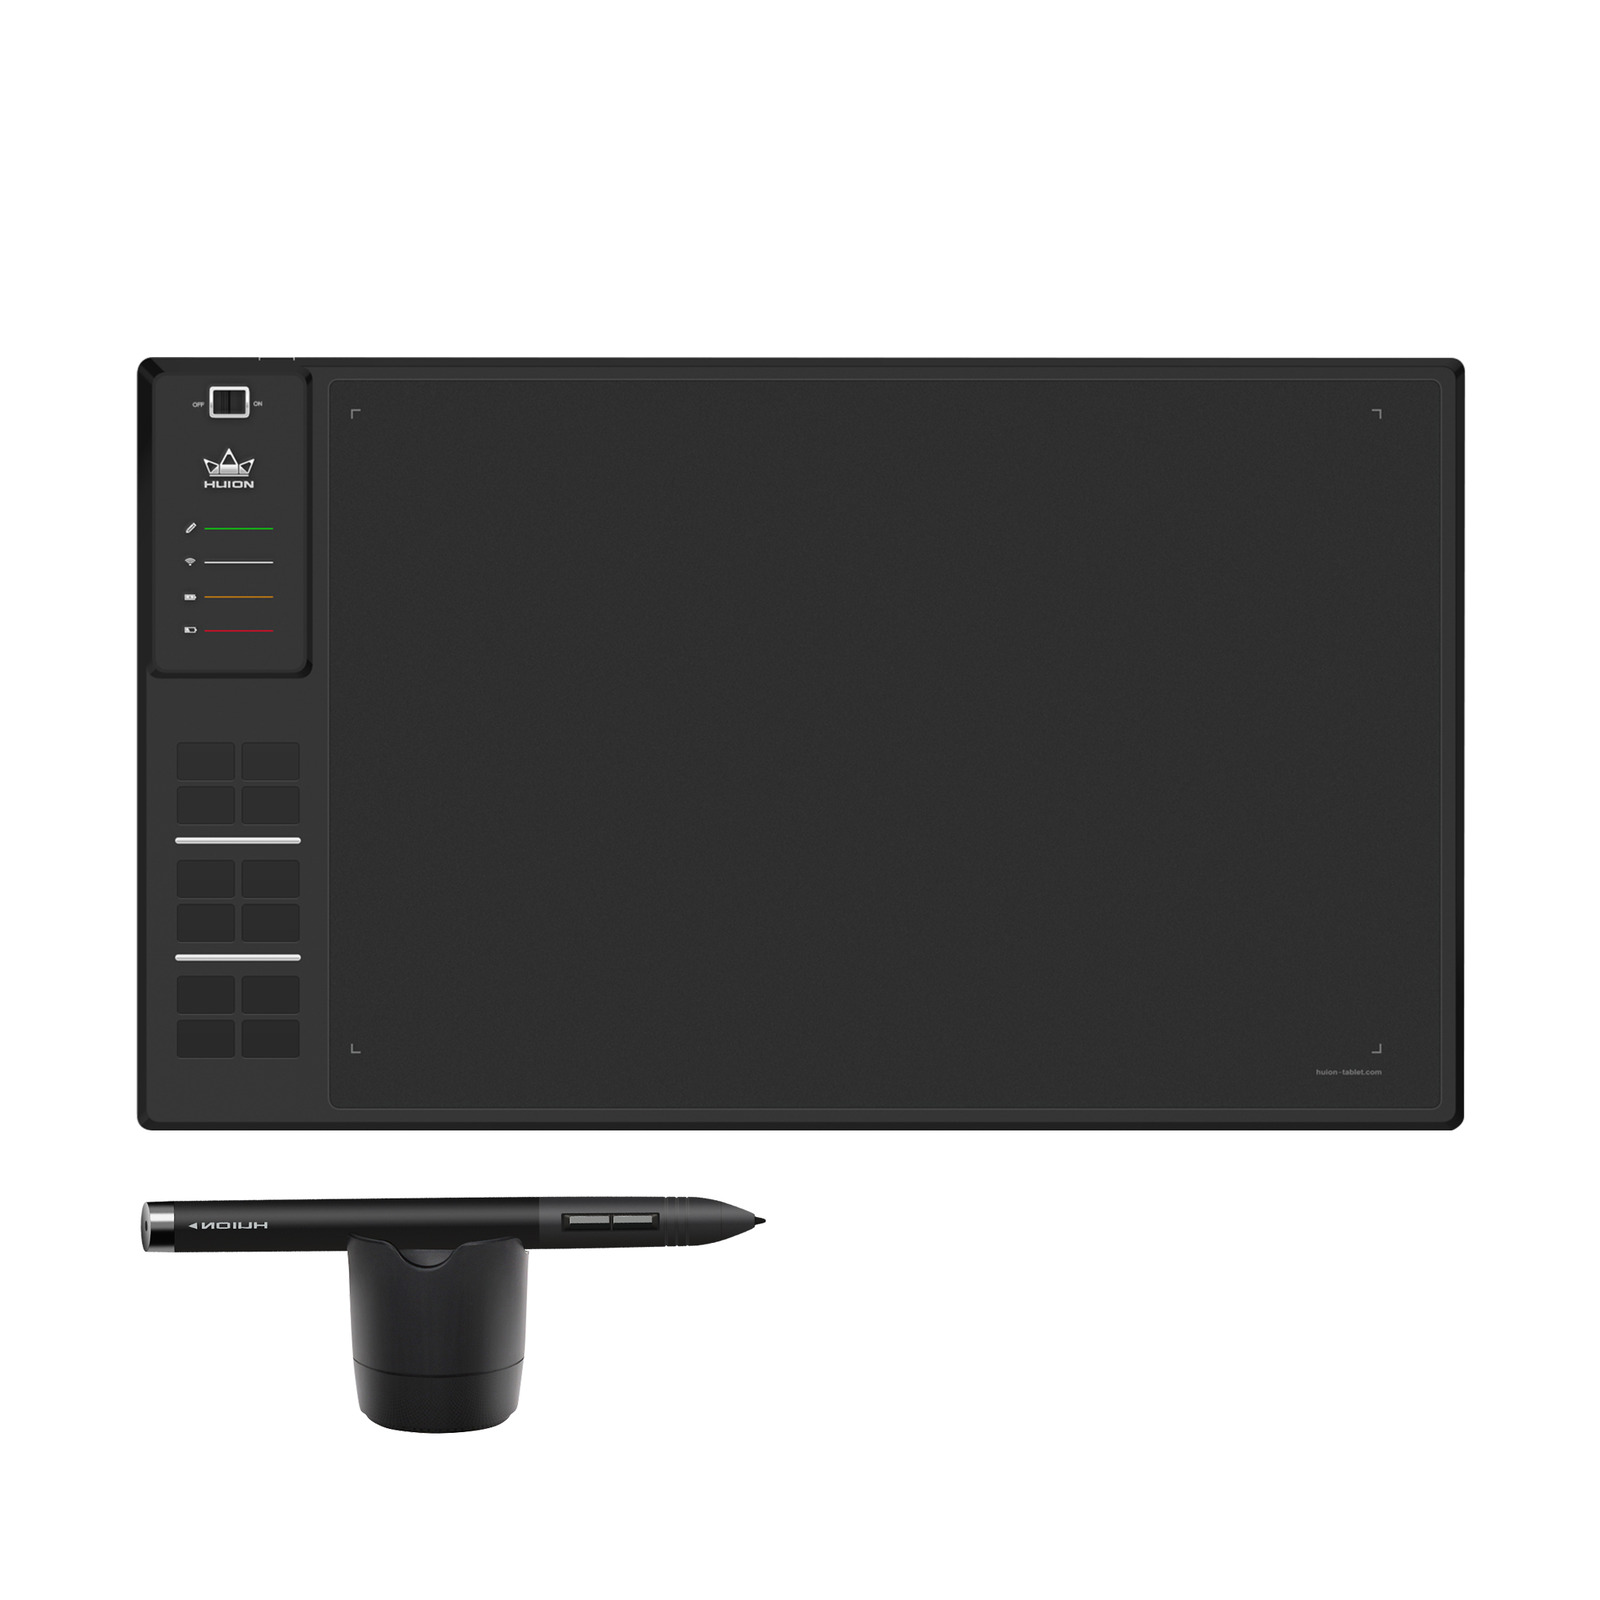 Huion WH1409 Large Size Wireless Graphics Drawing Tablet Certified Refurbished